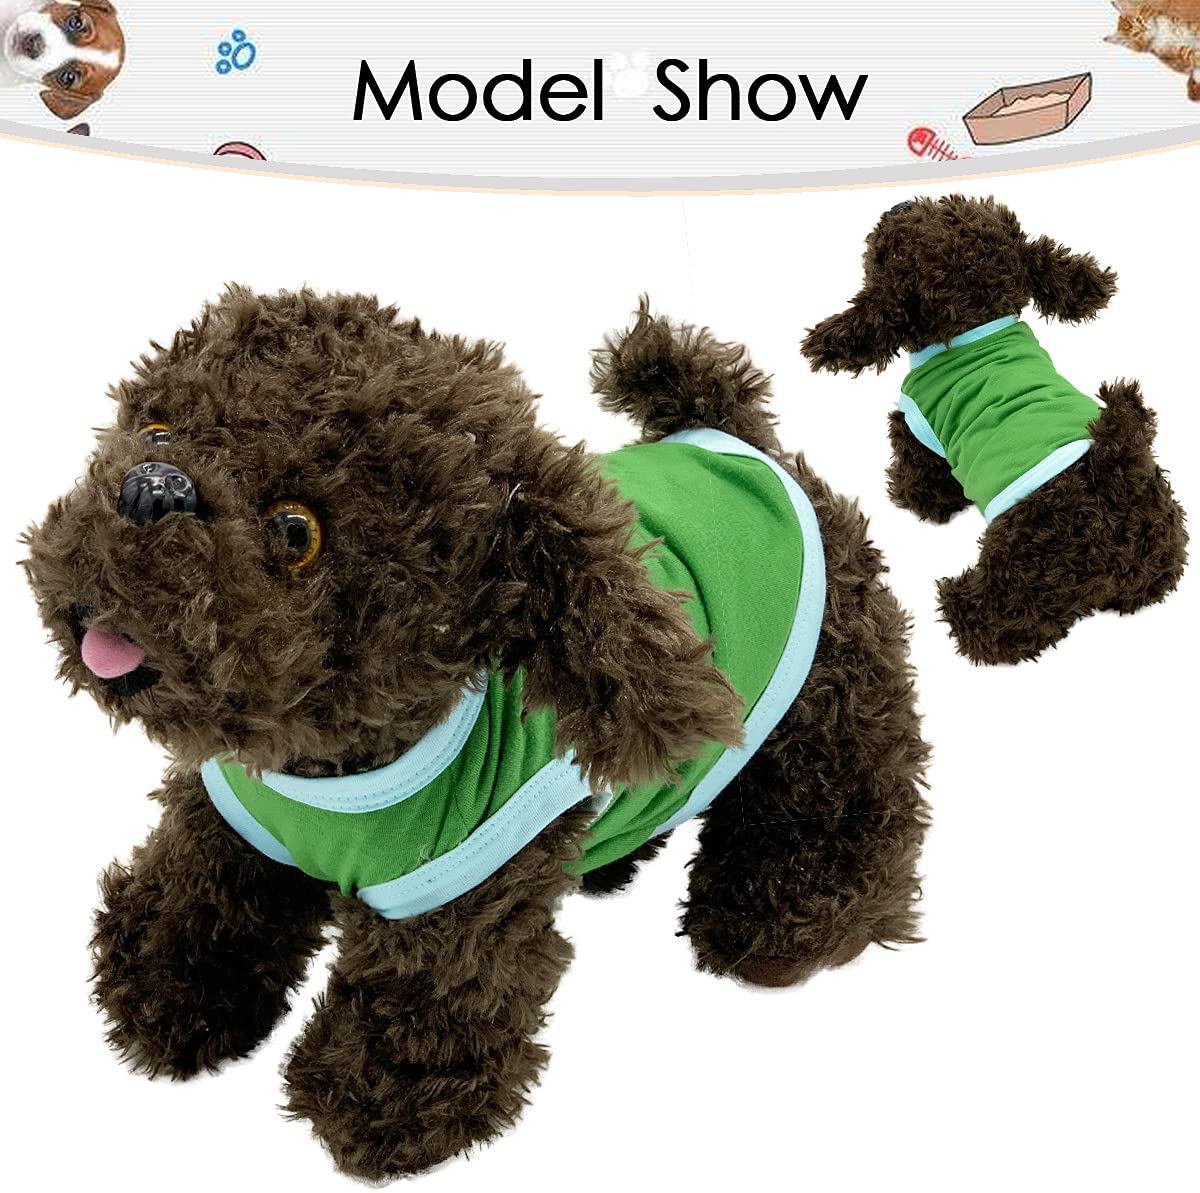 Dog T-Shirt Pet Summer Vests Clothes, Puppy Cute Costumes Shirts Soft and Breathable Clothing Doggy Fashion Printing Apparel Outfits for Small Medium Dogs Boy and Girl